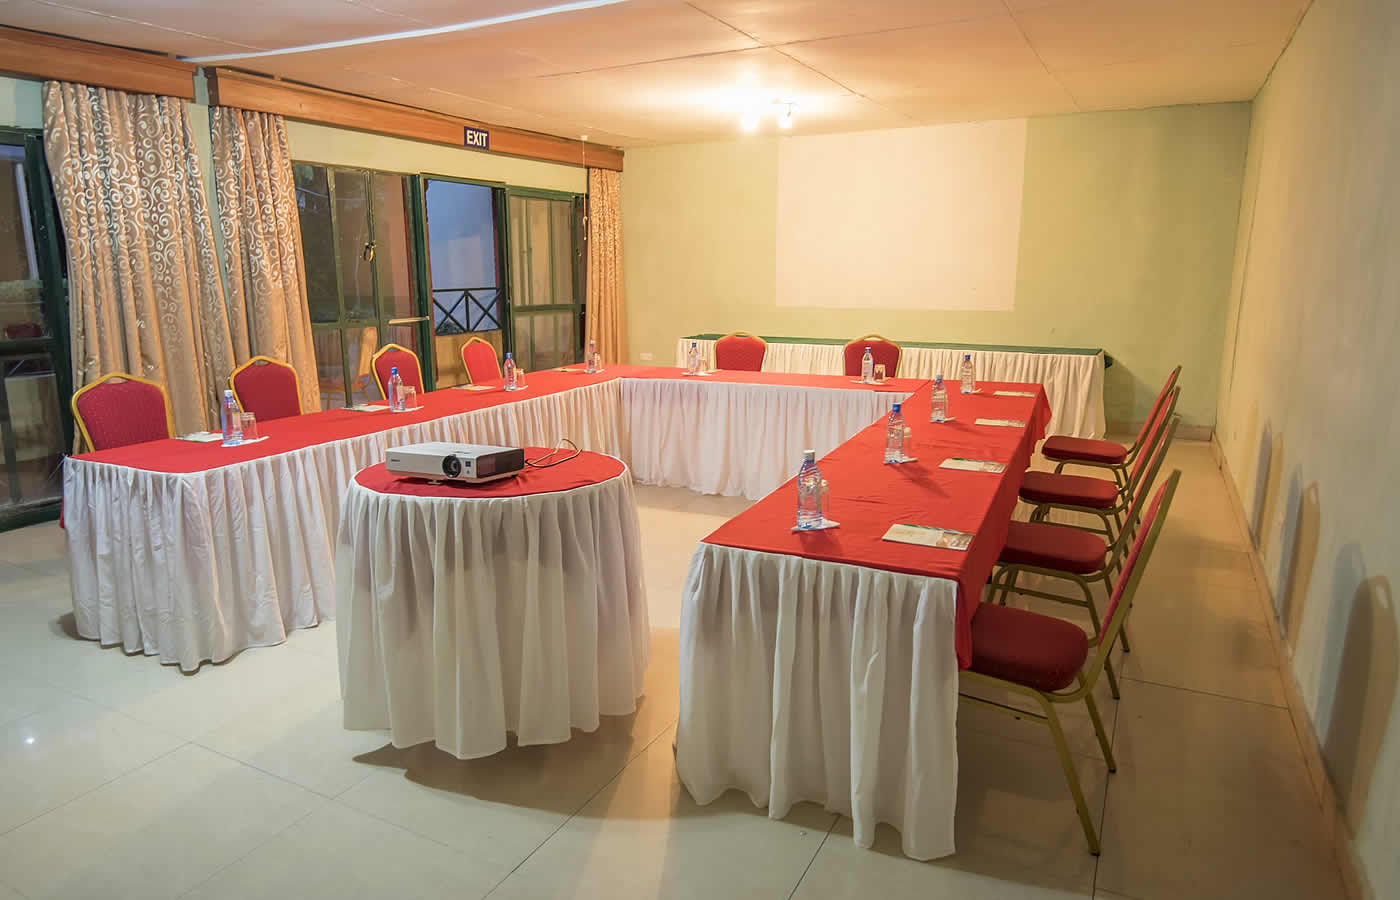 leon villas guesthouse conference hall